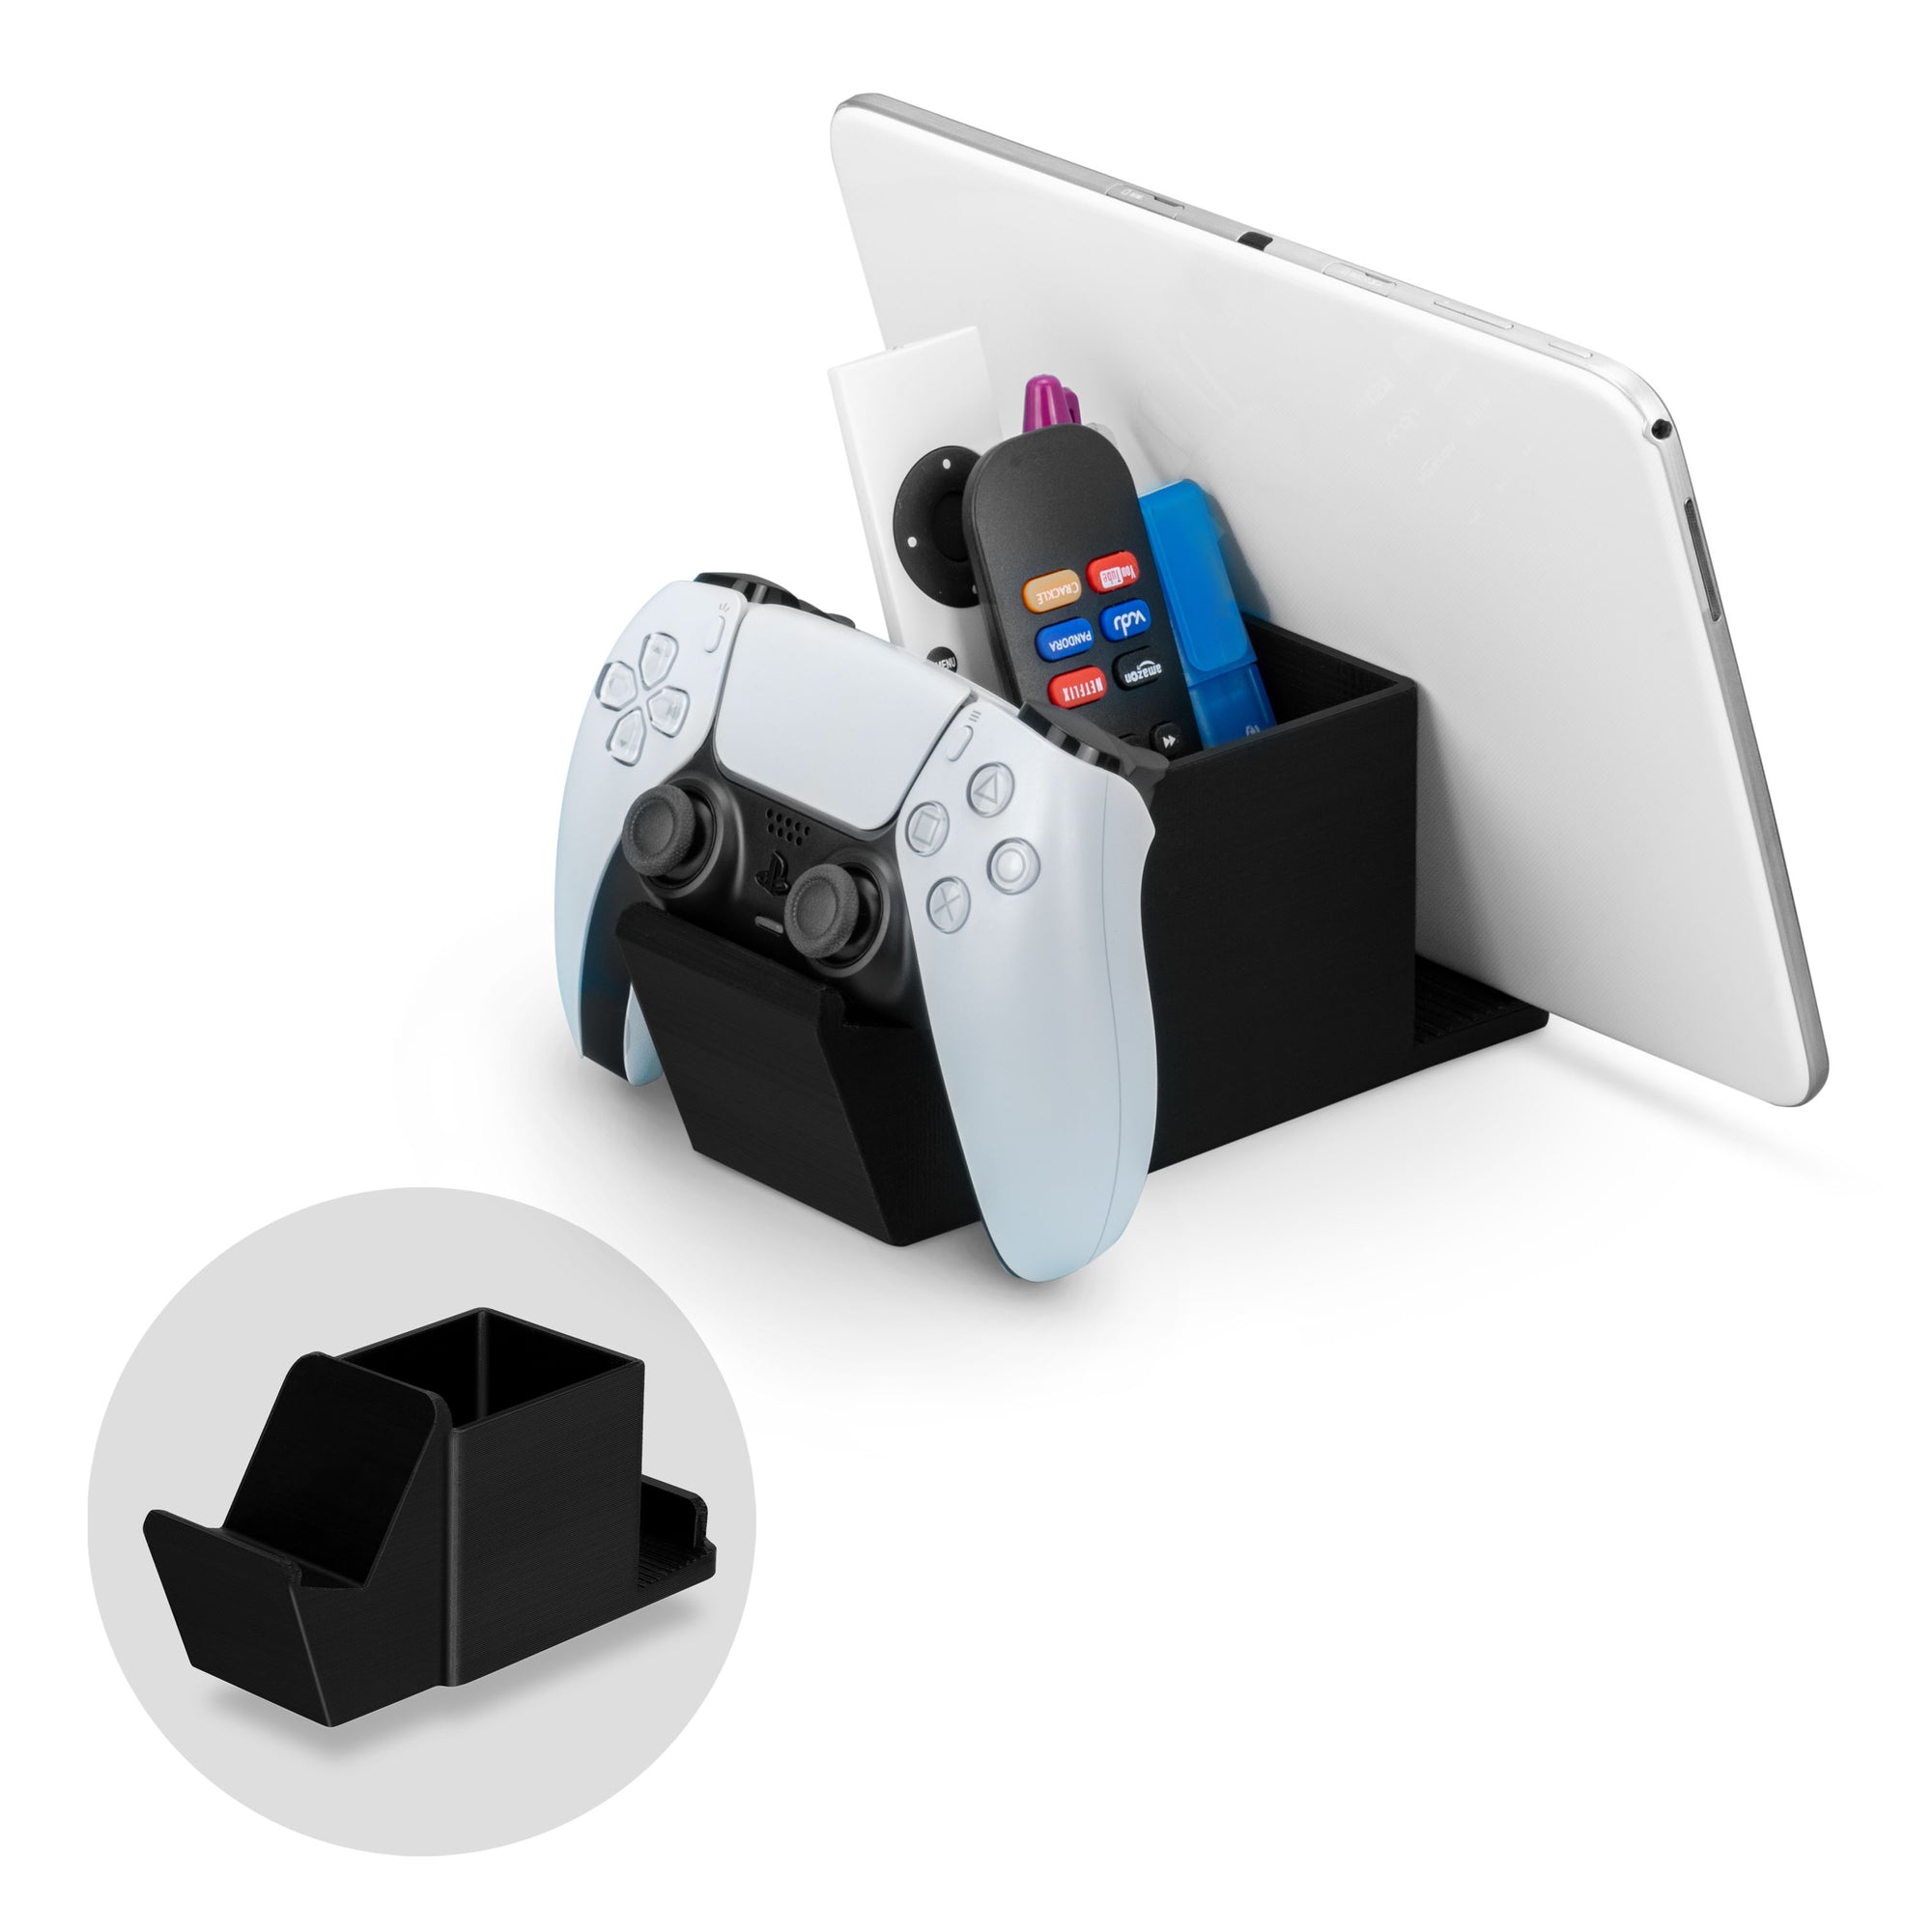 Desk Organizer with Game Controller Holder, Tablet Stand for iPads/iPhones, TV Remote & Pen Storage, Reduce Desktop Clutter, Have All Your Side Table Items in One Space